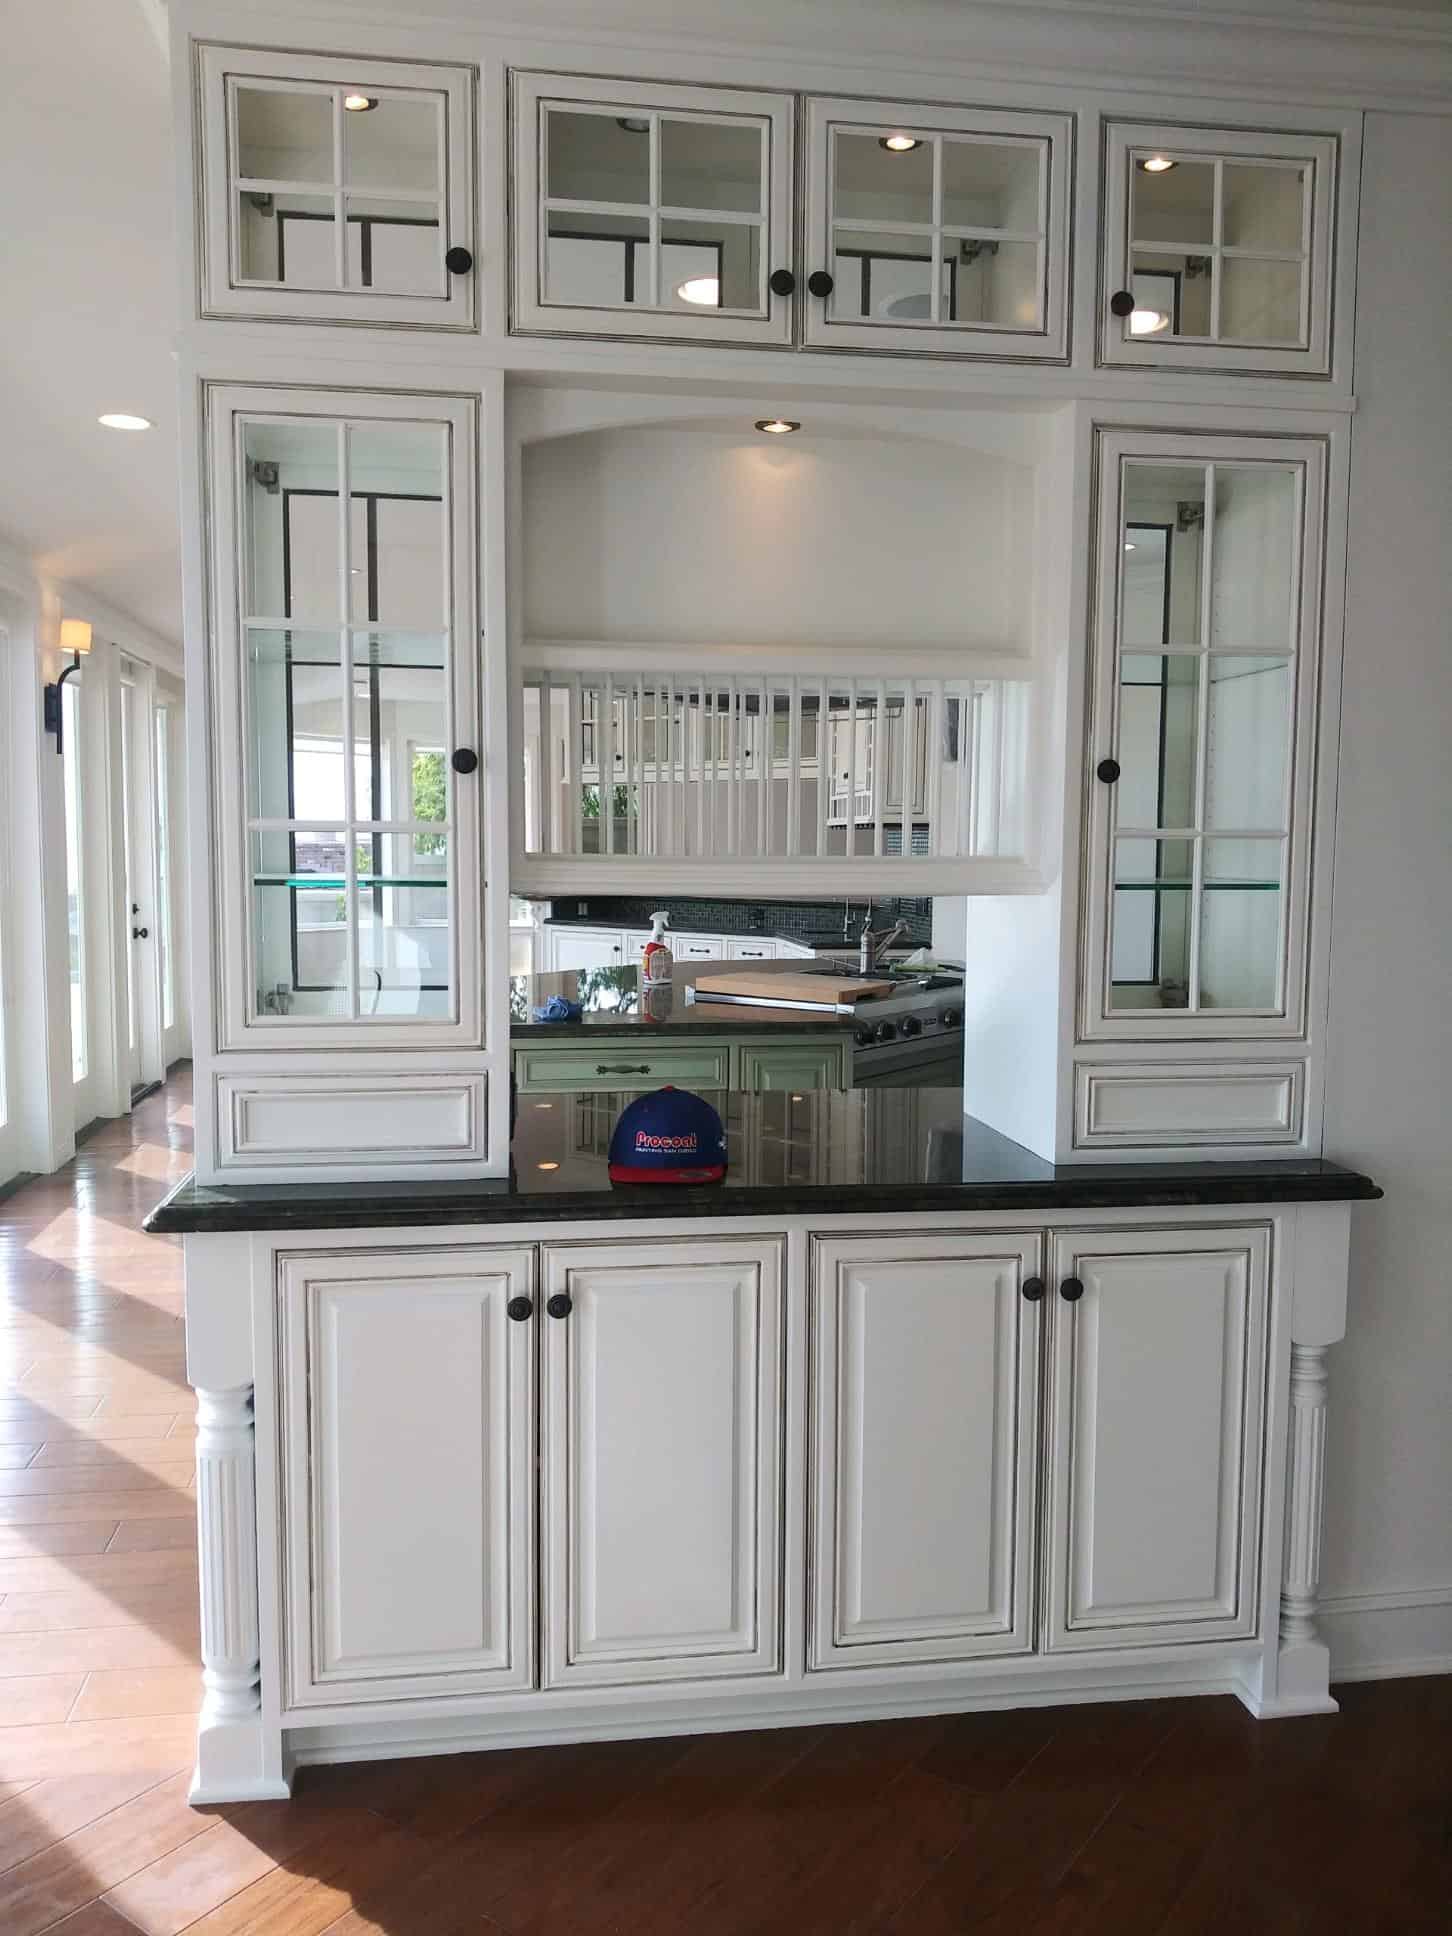 San Marcos Cabinet Painting - Procoat Painting